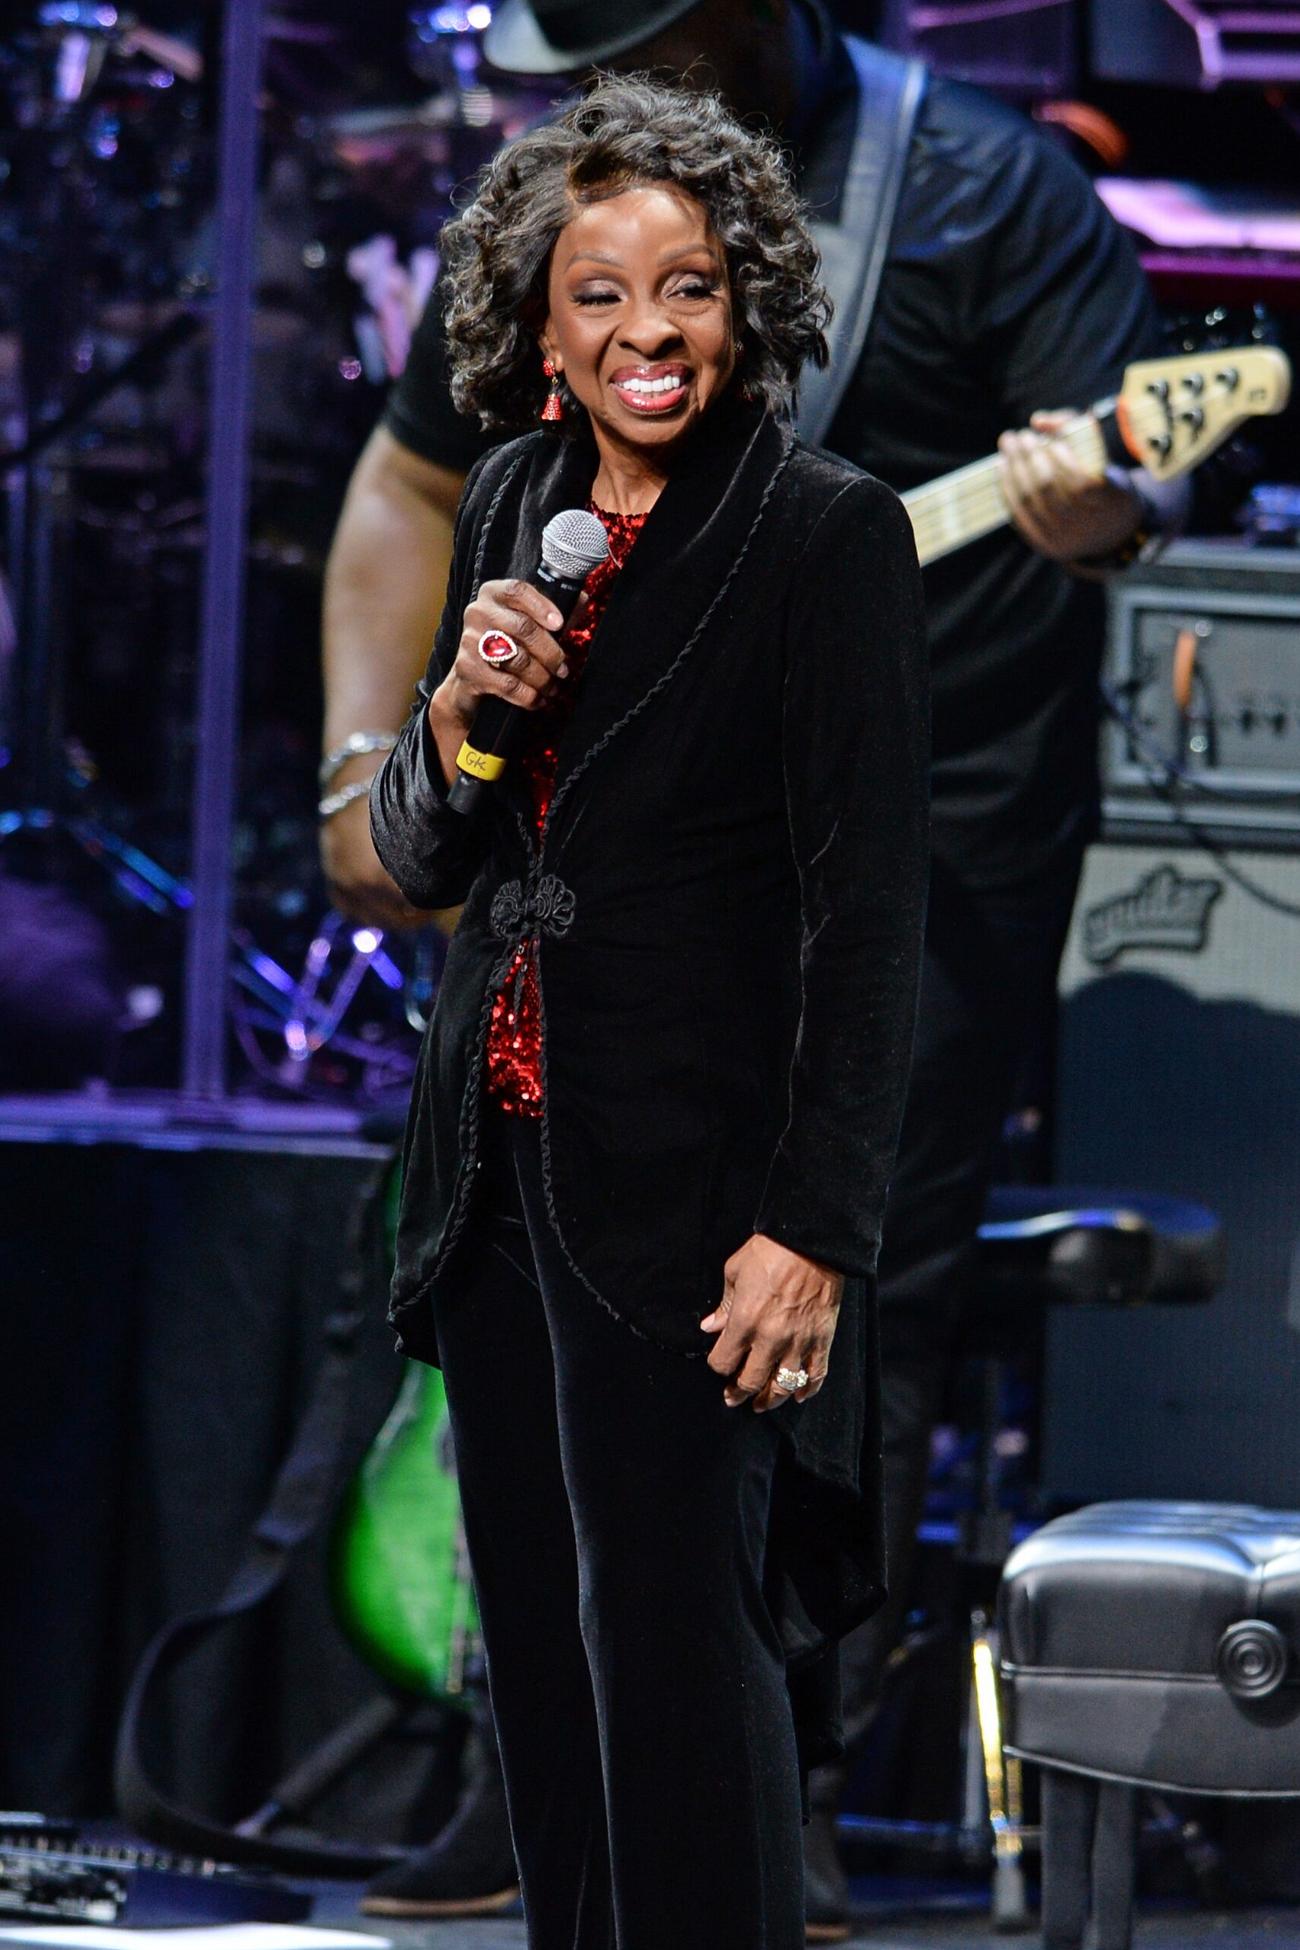 Gladys Knight performs at Hard Rock Live